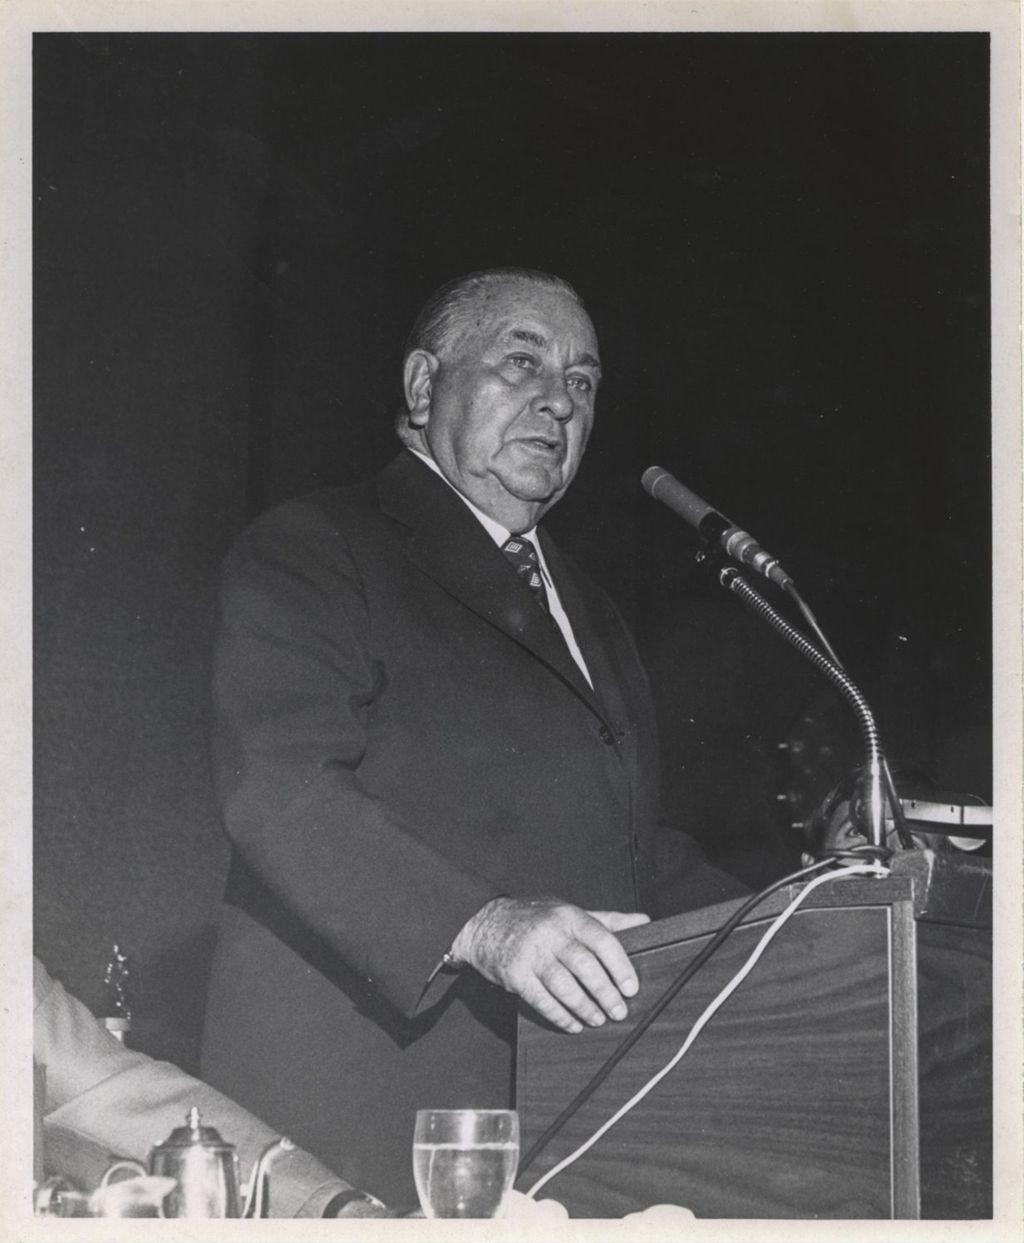 Miniature of Richard J. Daley speaking at re-election rally